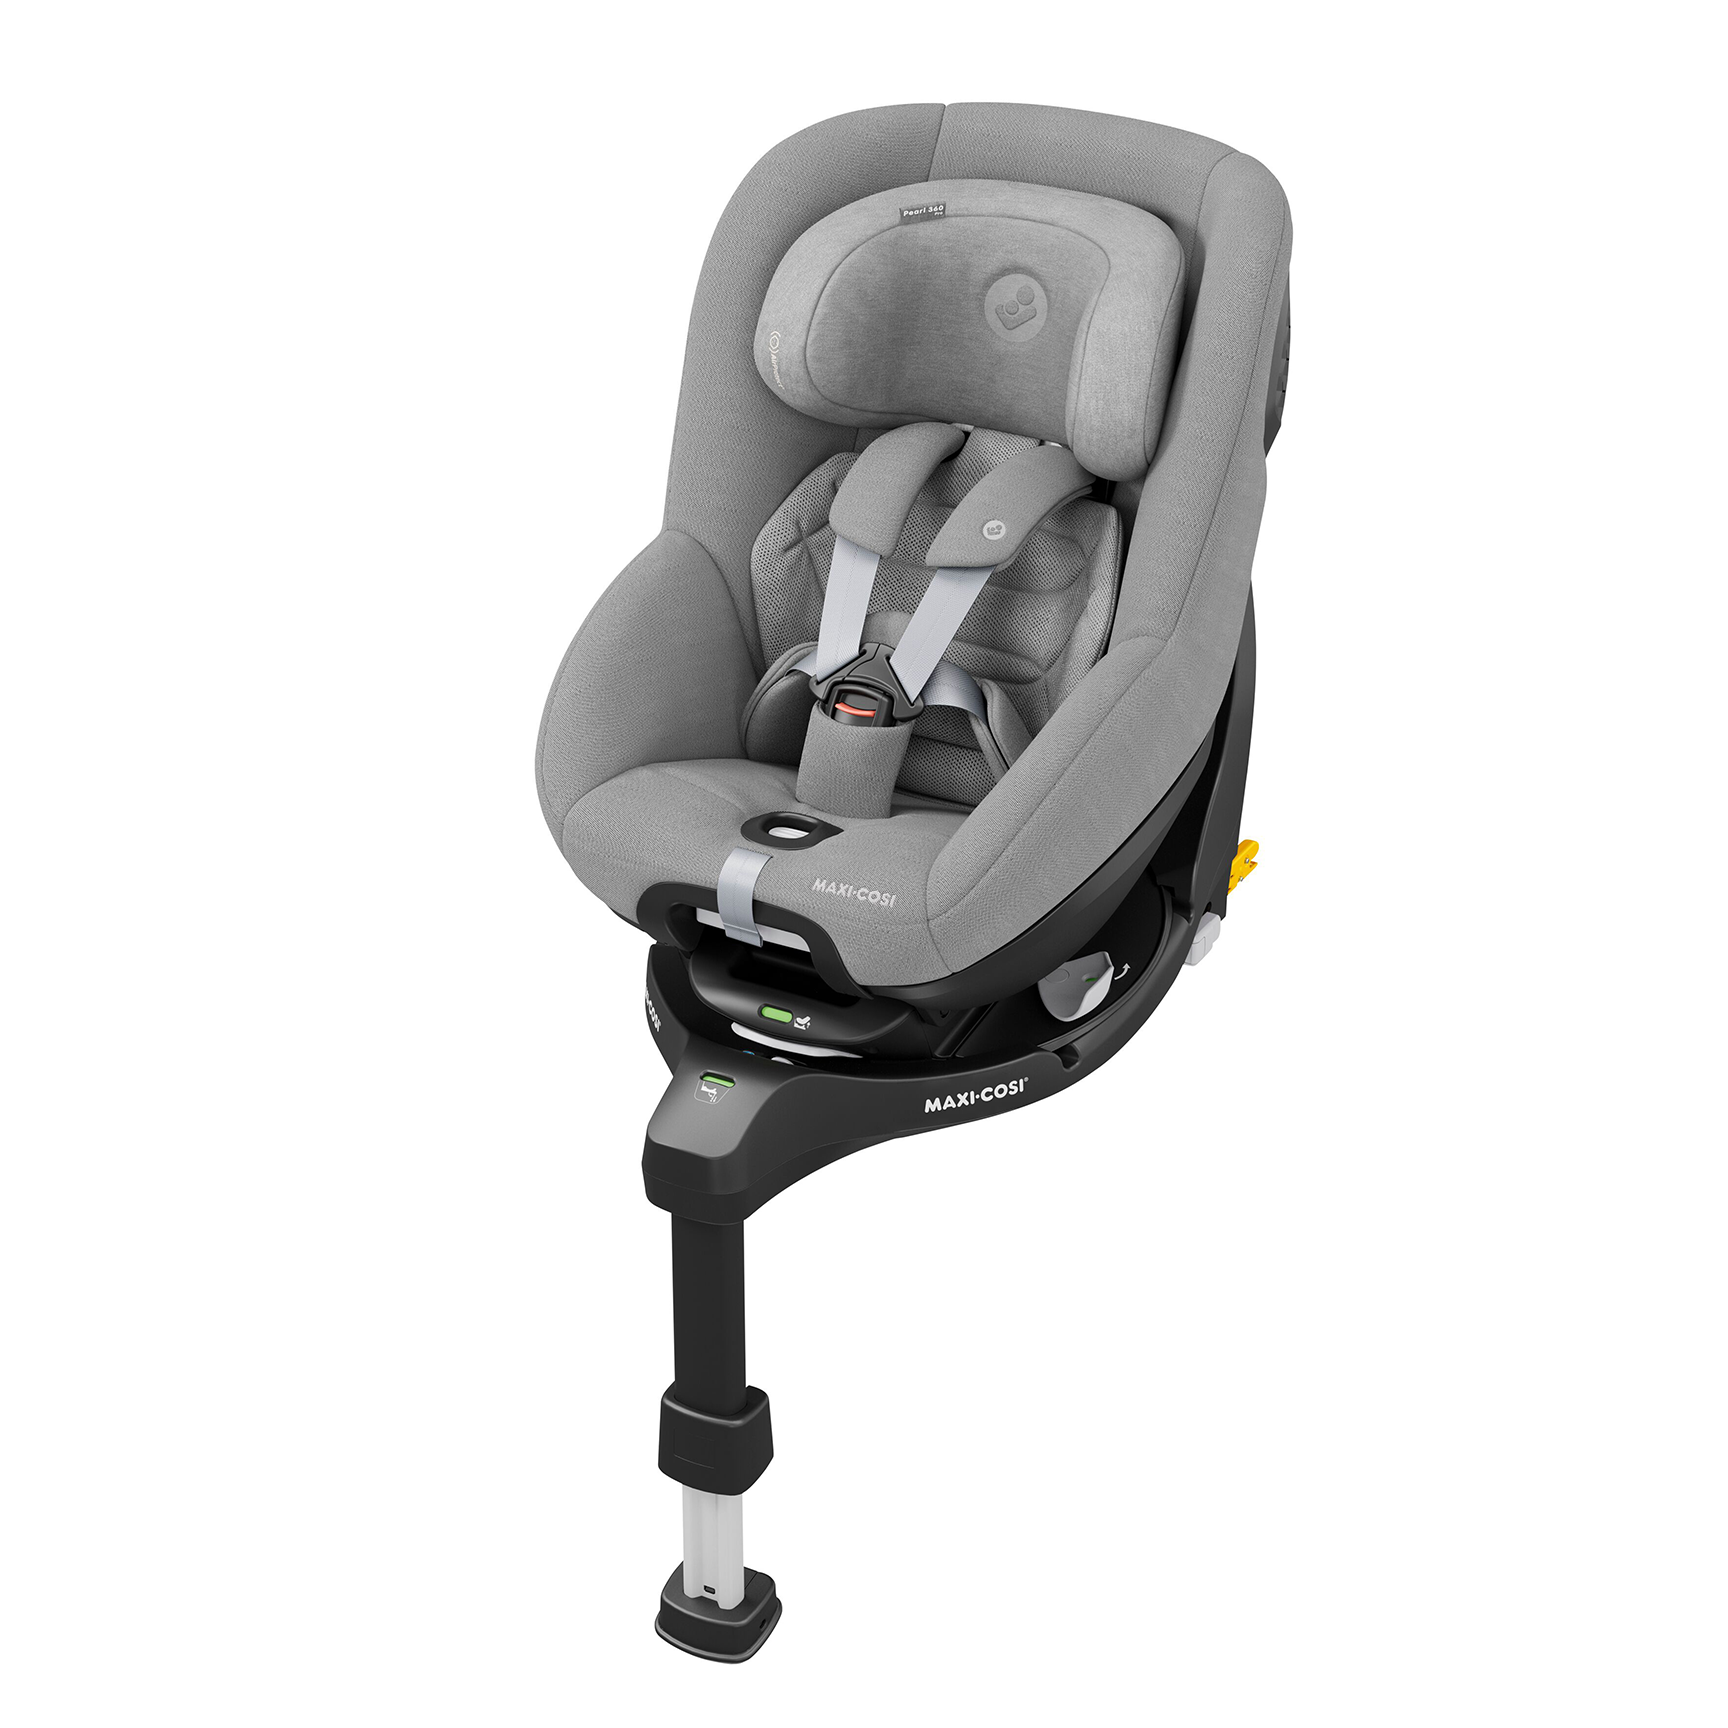 Maxi Cosi 360 Pro Family: Members and Features